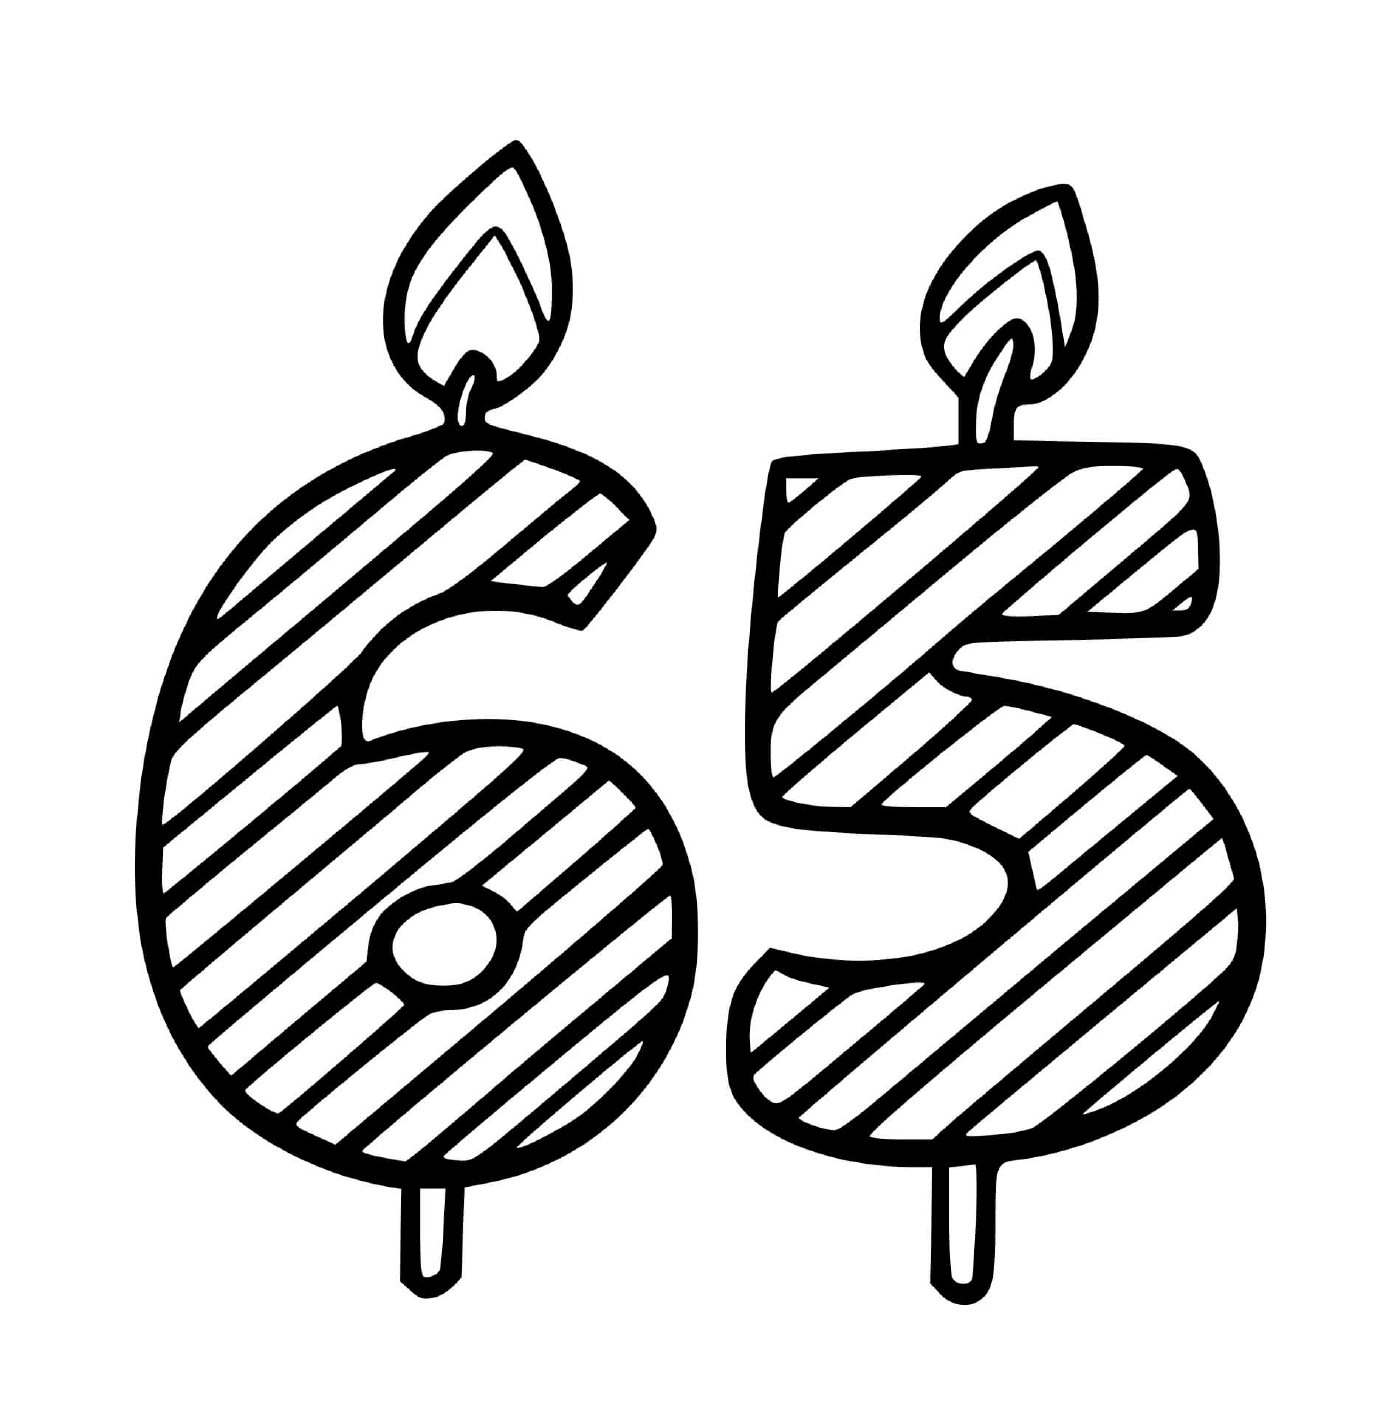  A candle representing the number six and five 